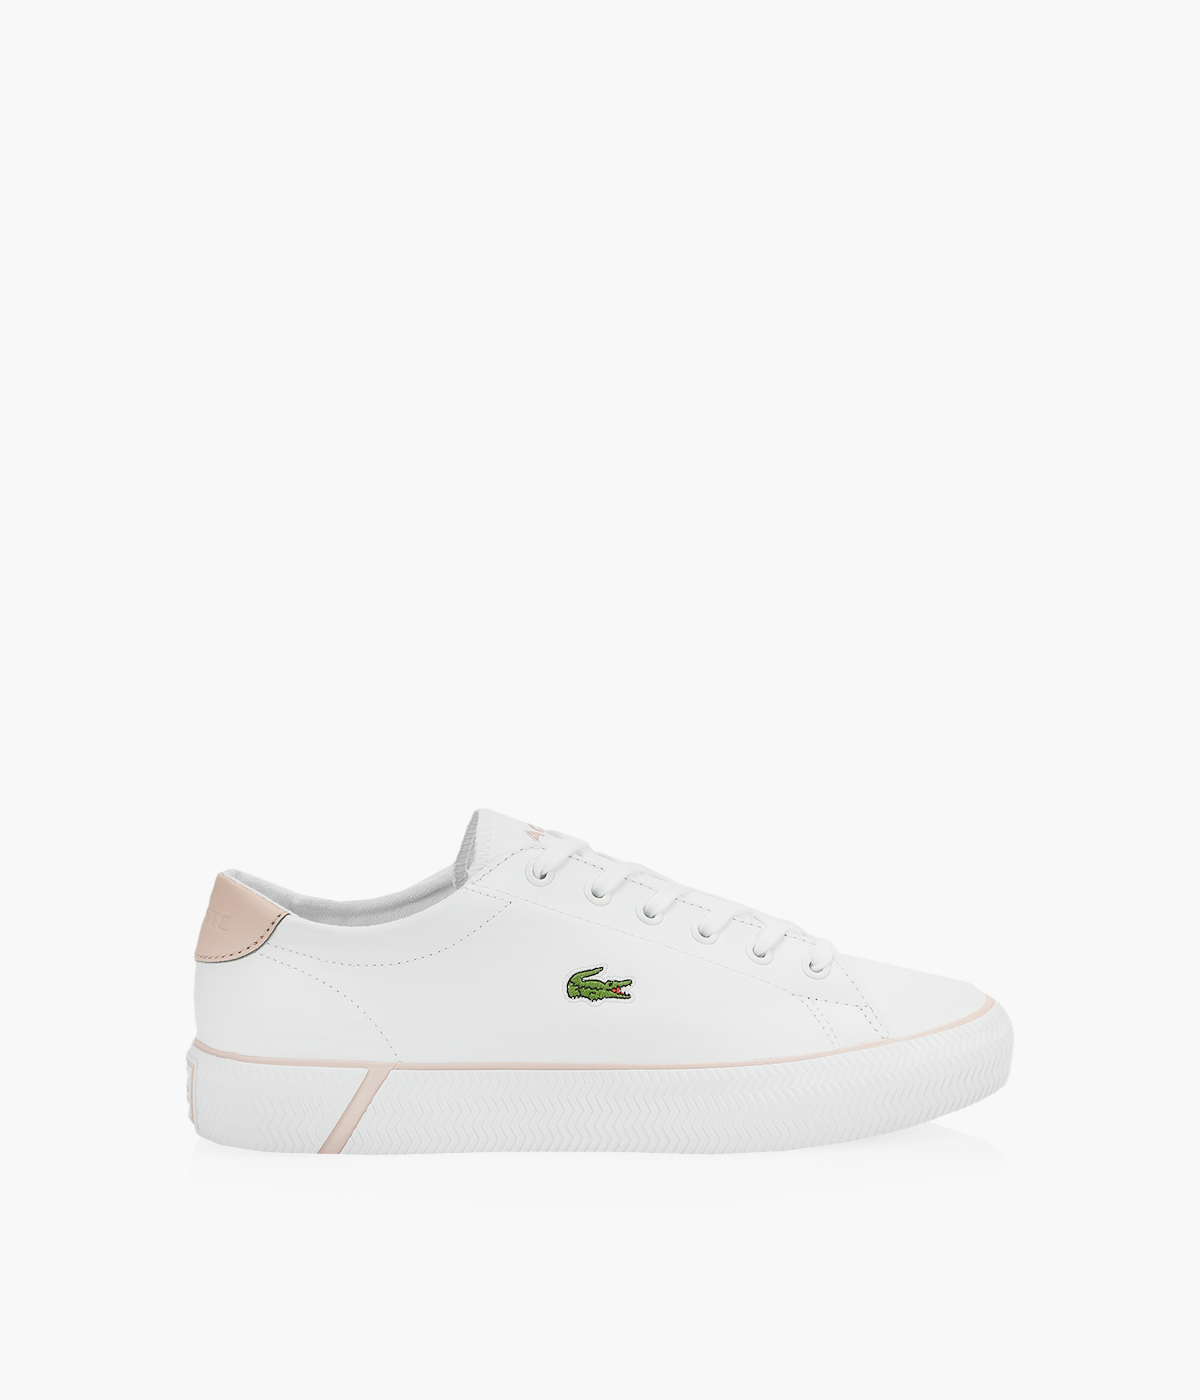 LACOSTE GRIPSHOT - White Leather | Browns Shoes